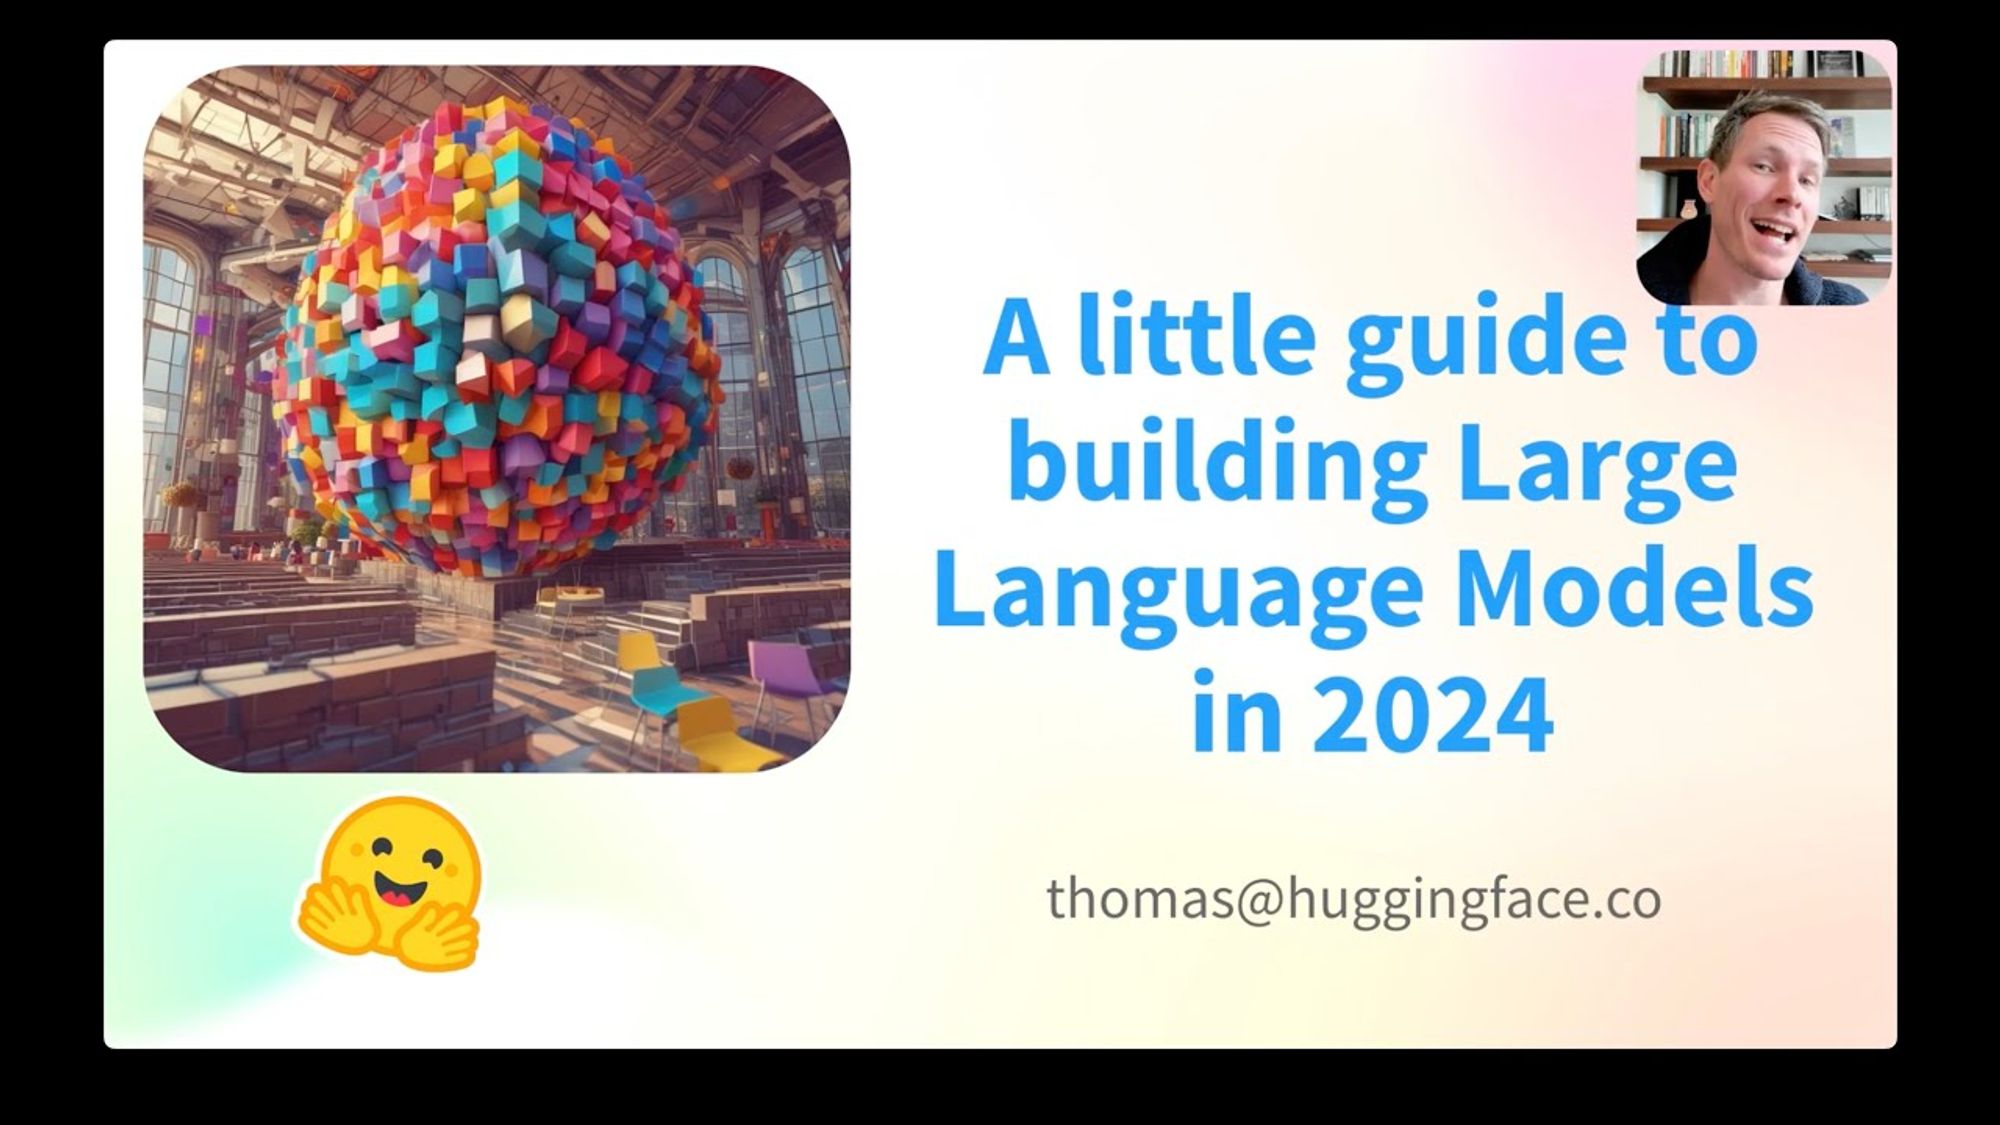 A little guide to building Large Language Models in 2024